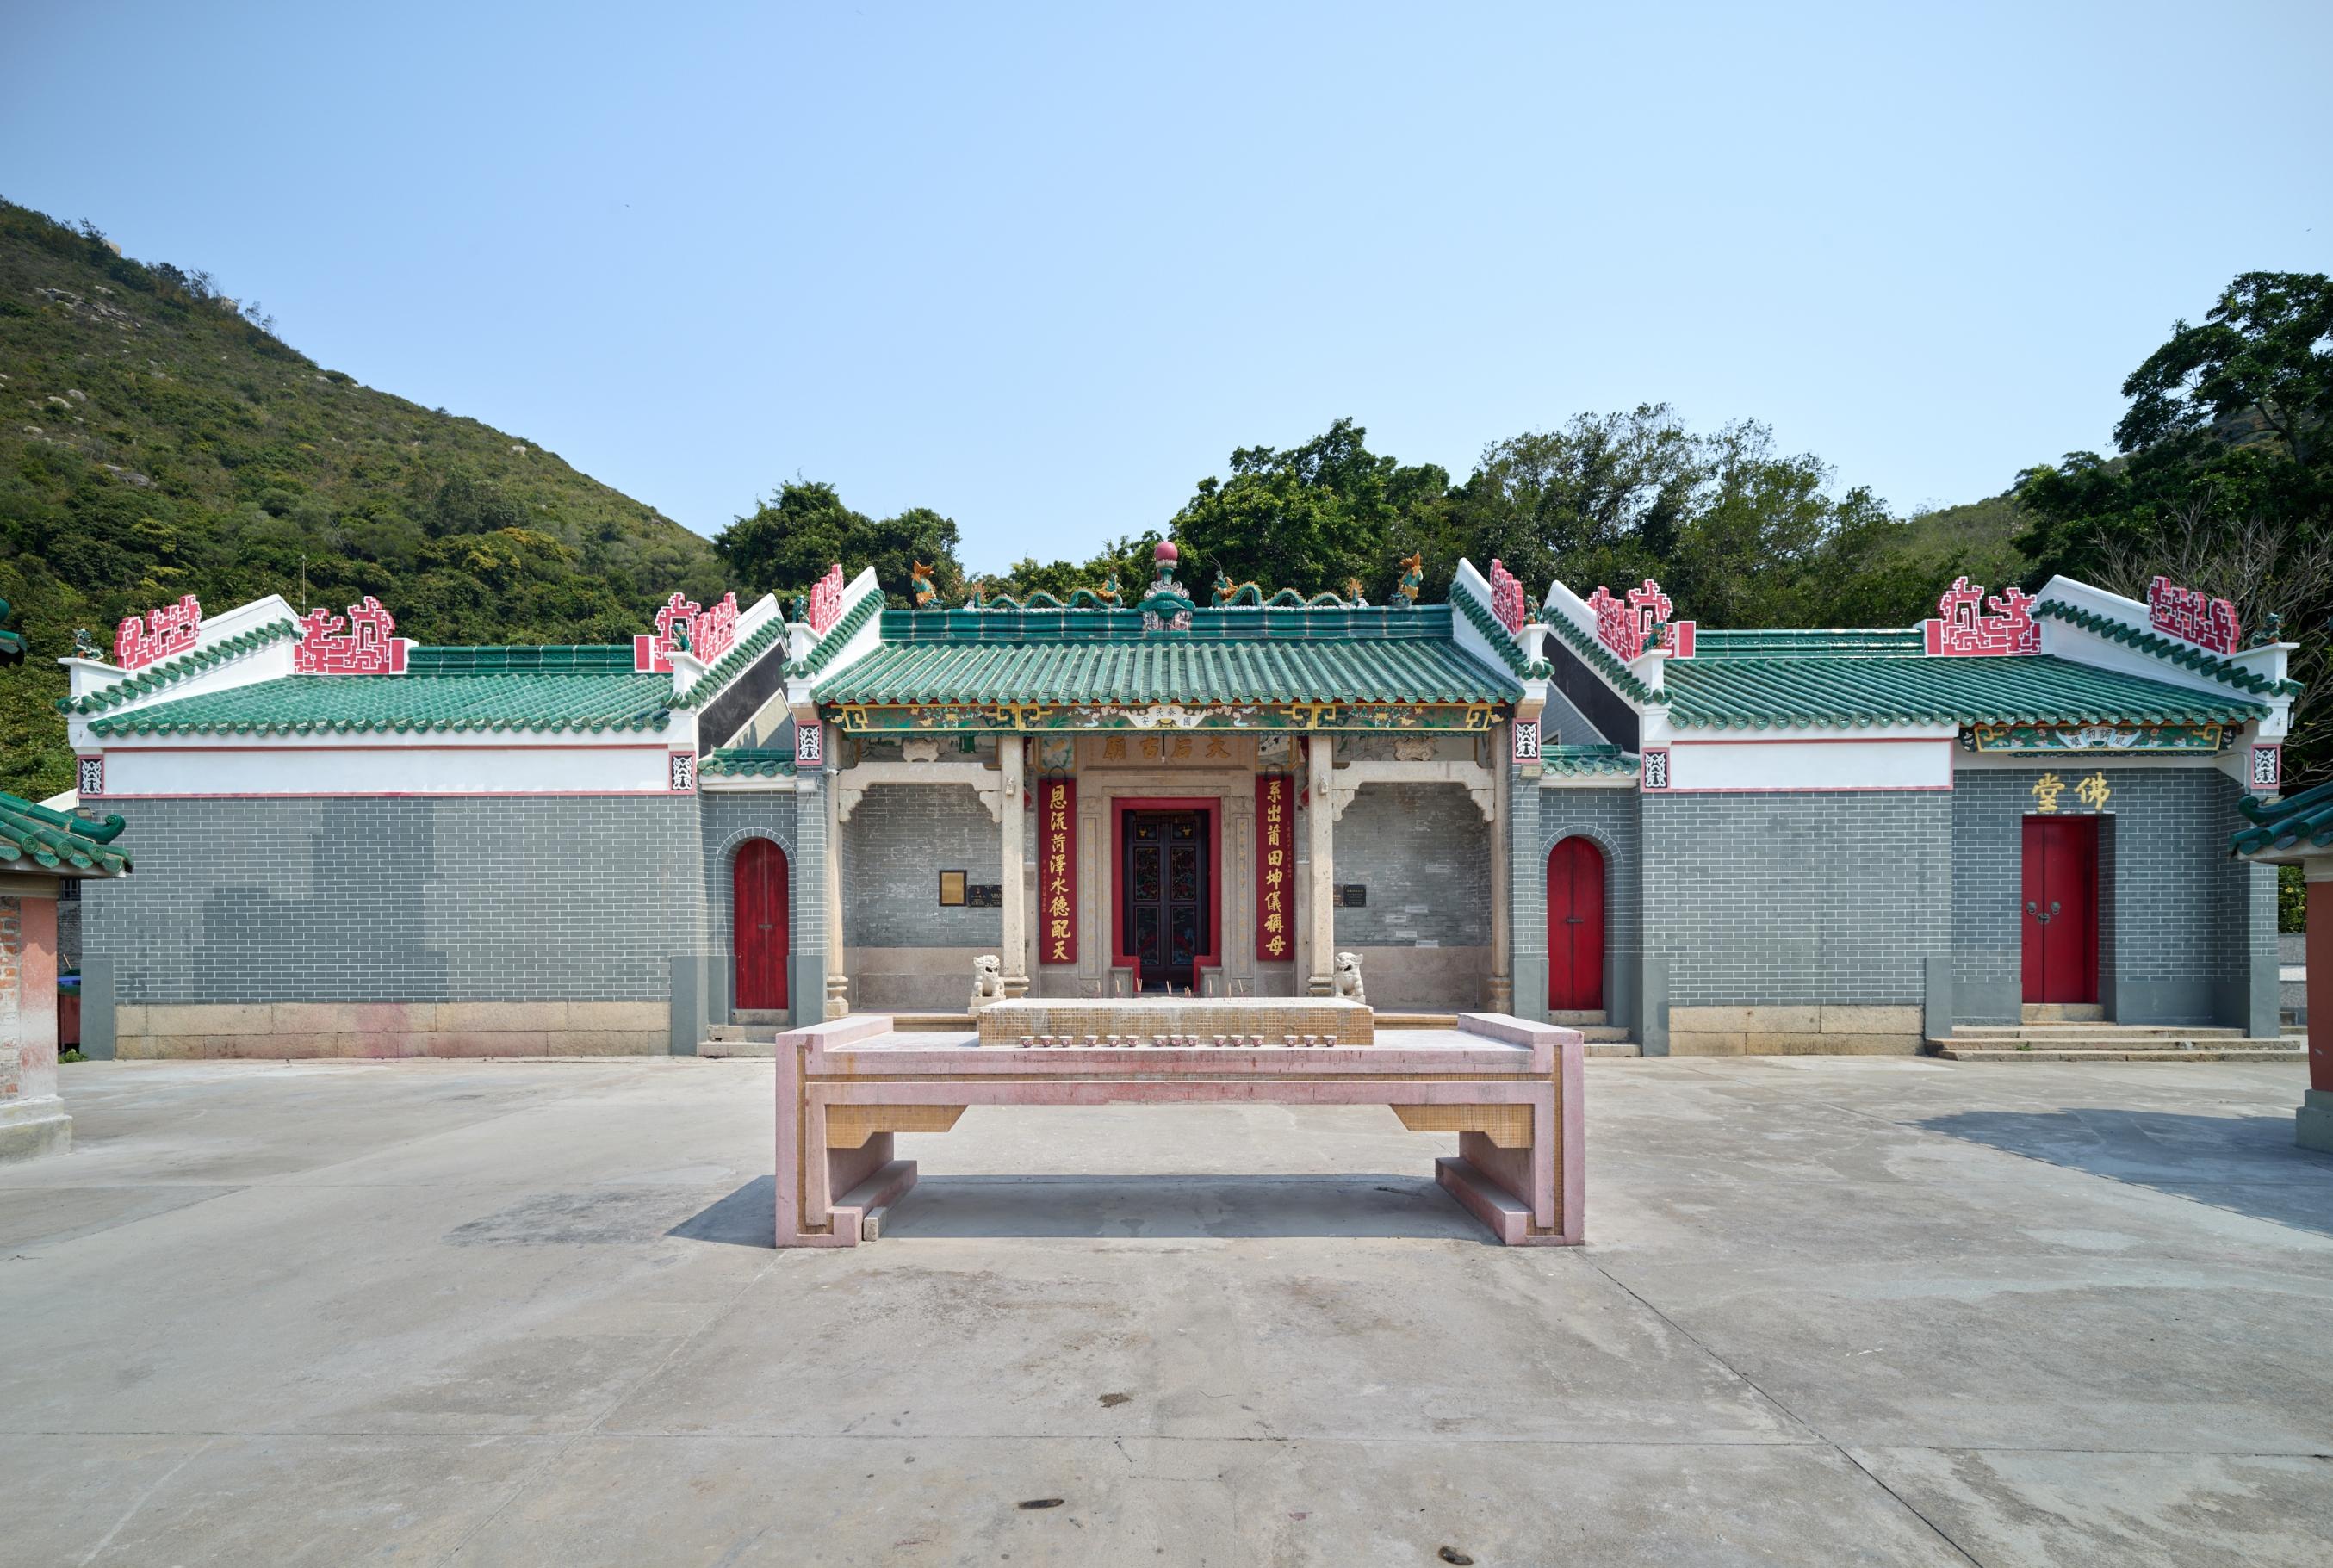 The Government gazetted today (October 20) the declaration of the Tin Hau Temple at Joss House Bay (the Temple) in Sai Kung as a monument under the Antiquities and Monuments Ordinance. Photo shows the front façade of the Temple.